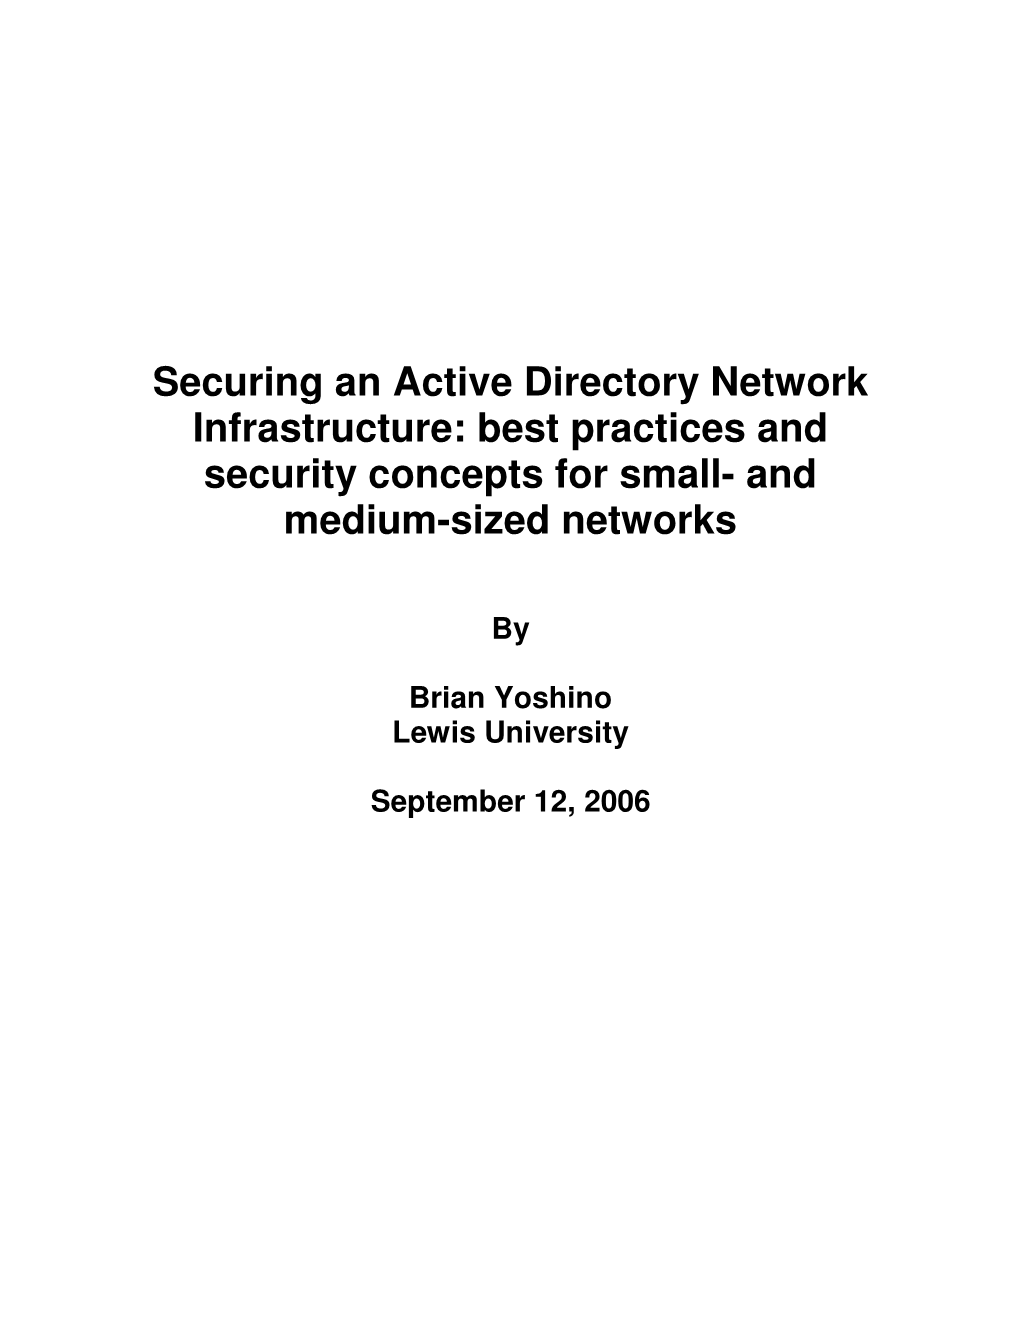 Securing an Active Directory Network Infrastructure: Best Practices and Security Concepts for Small- and Medium-Sized Networks